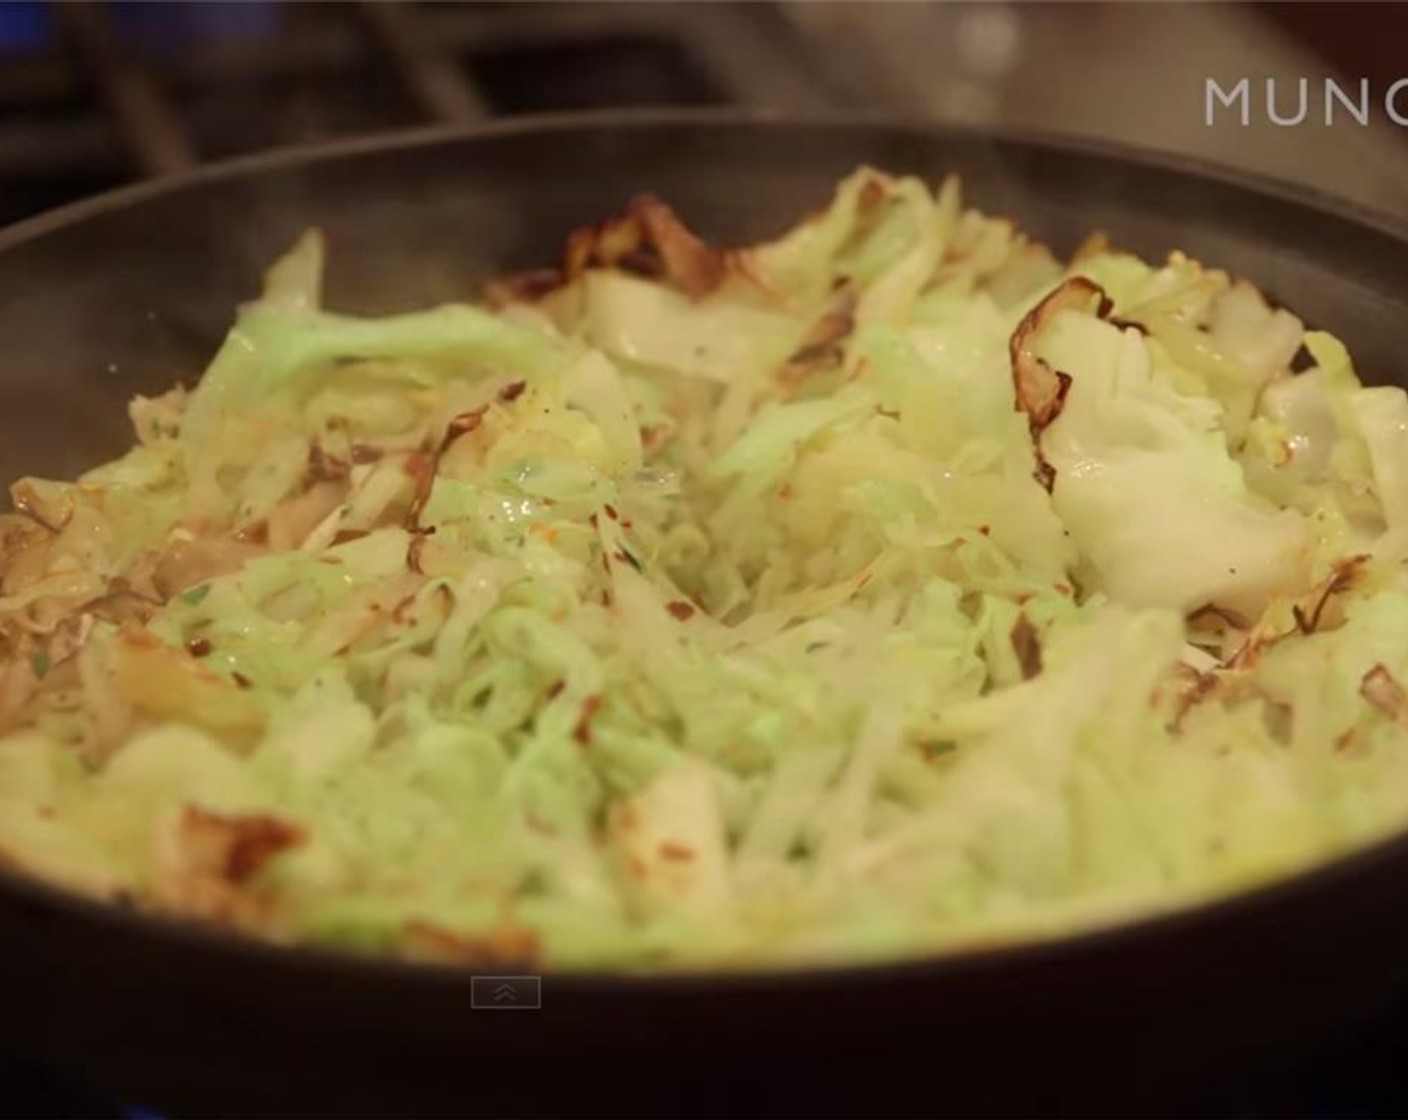 step 5 Toss the cabbage and continue to cook for 5 minutes, tossing every so often.